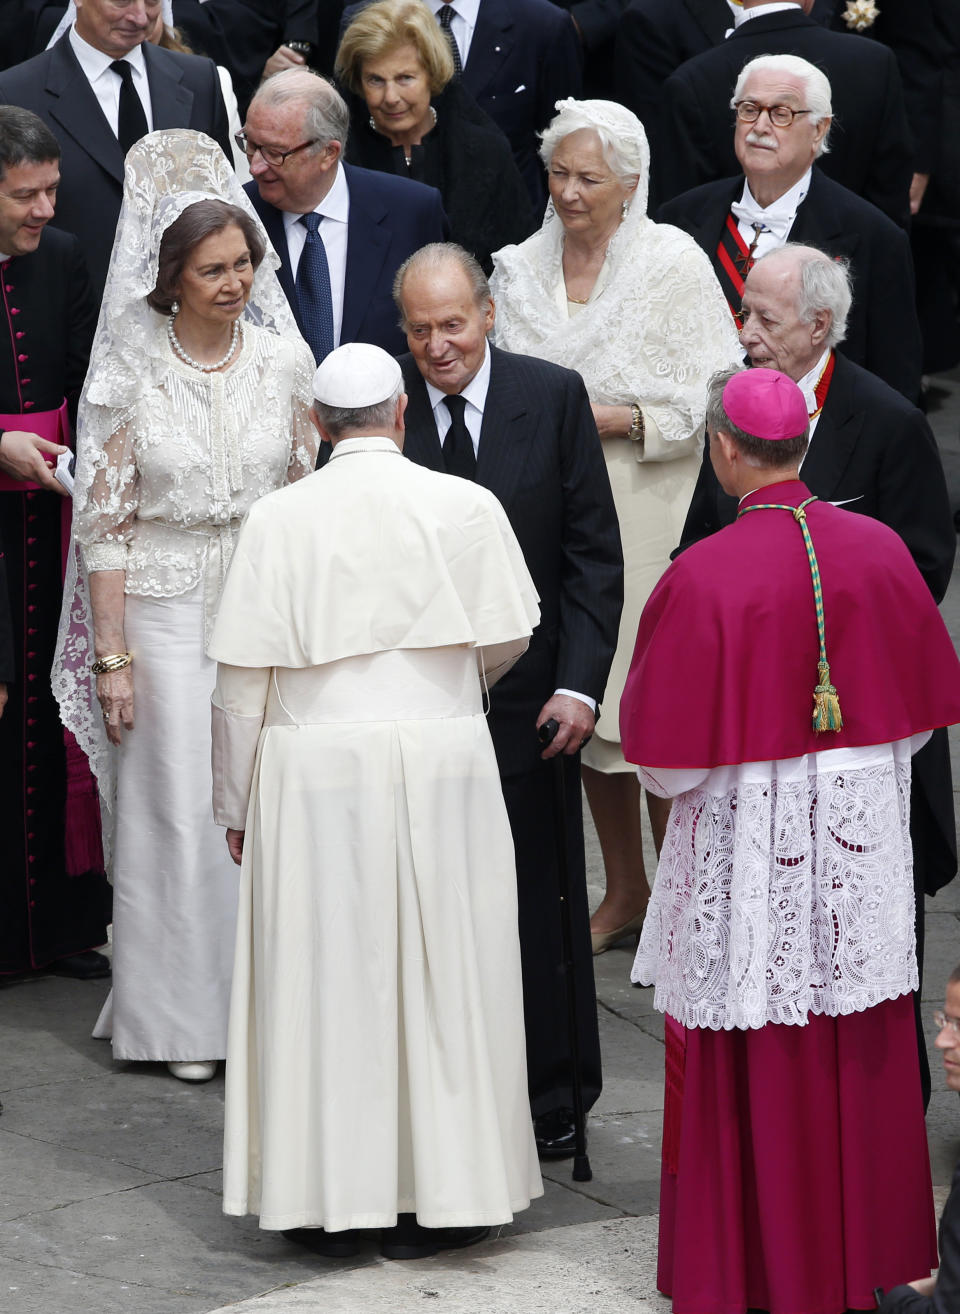 Spain's Queen Sofia and Belgium's Queen Paola exercised their&nbsp;whites at the&nbsp;the canonization of Popes John Paul II and John XXIII in 2014.